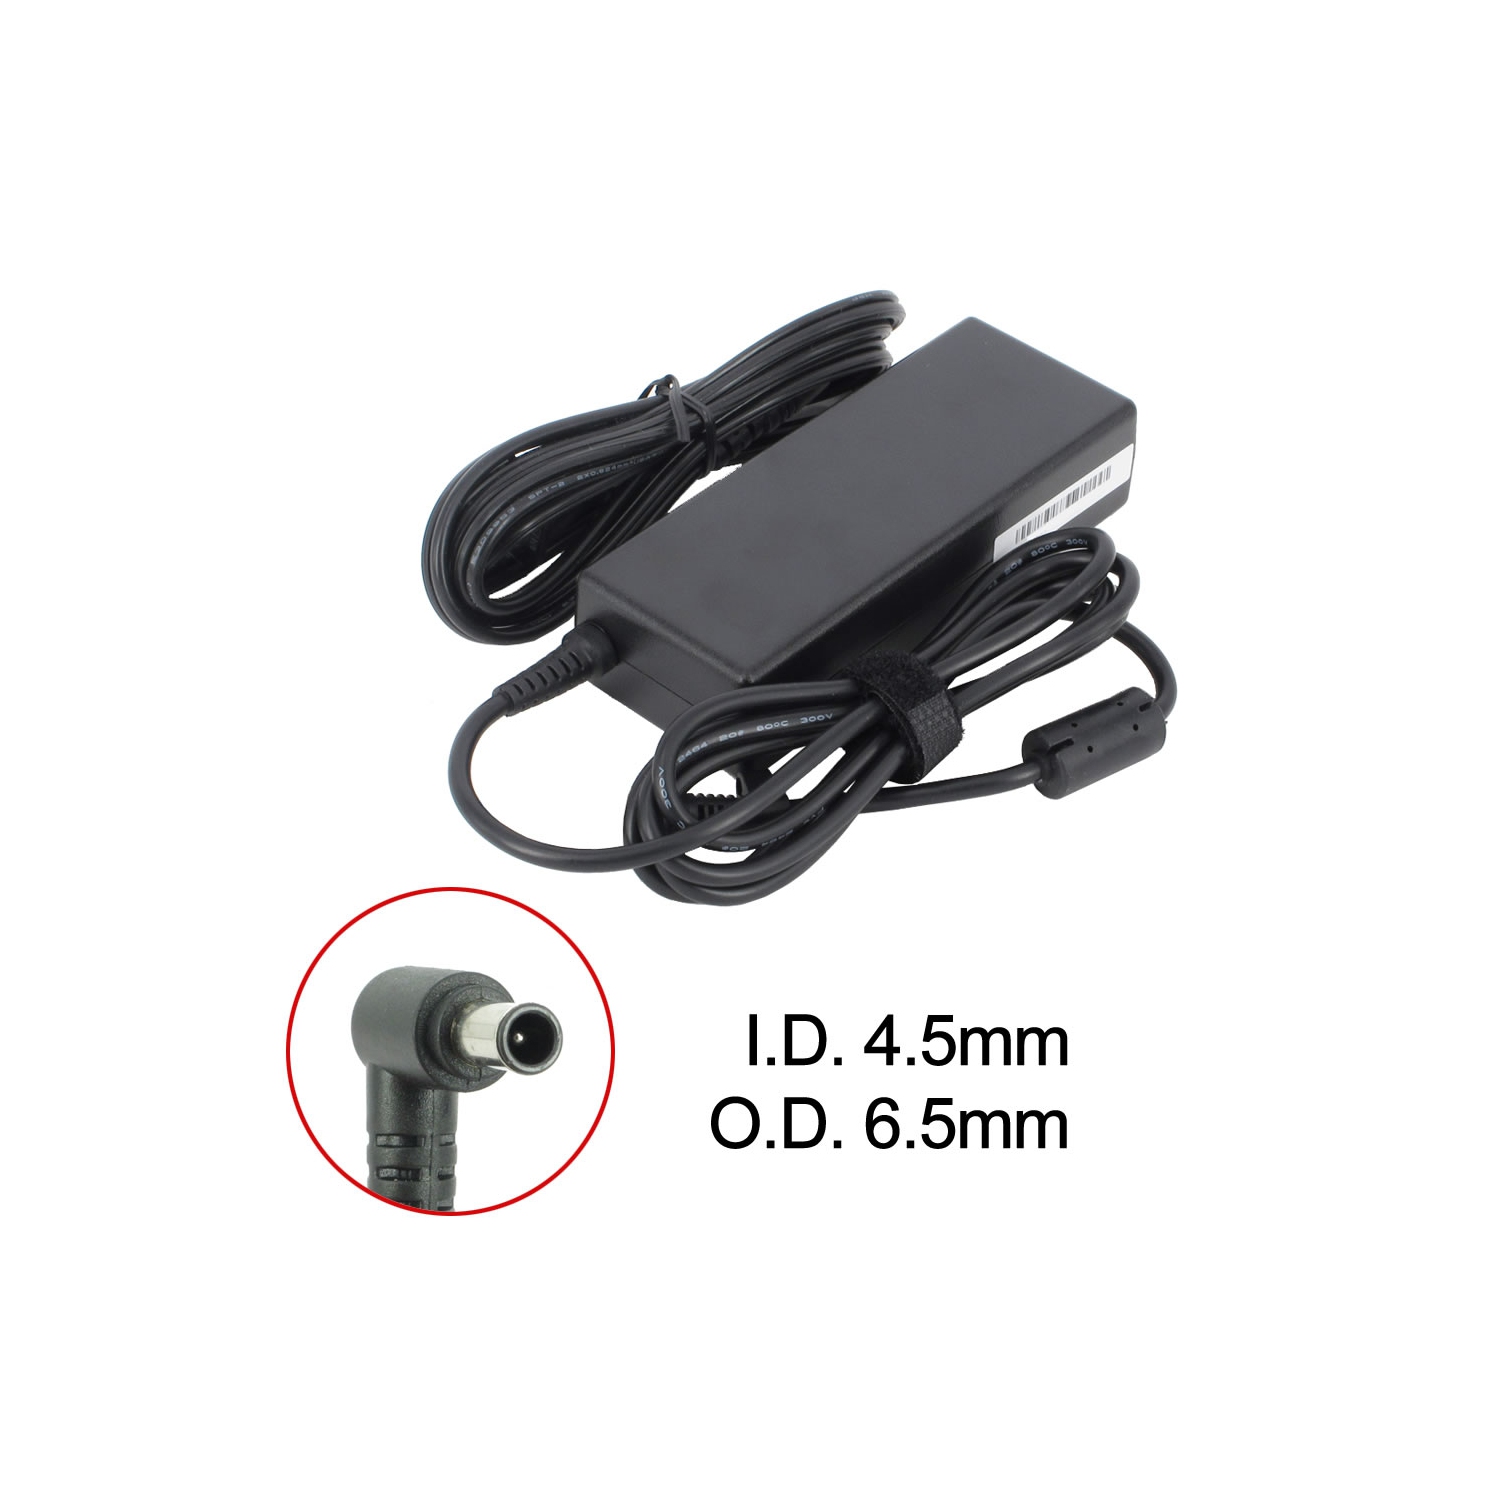 Brand New Laptop AC Adapter for Sony VAIO VGN-SZ3XWPC, PCGA-AC19V12, VGP-AC19V11, VGP-AC19V22, VGP-AC19V32, VGP-AC19V71